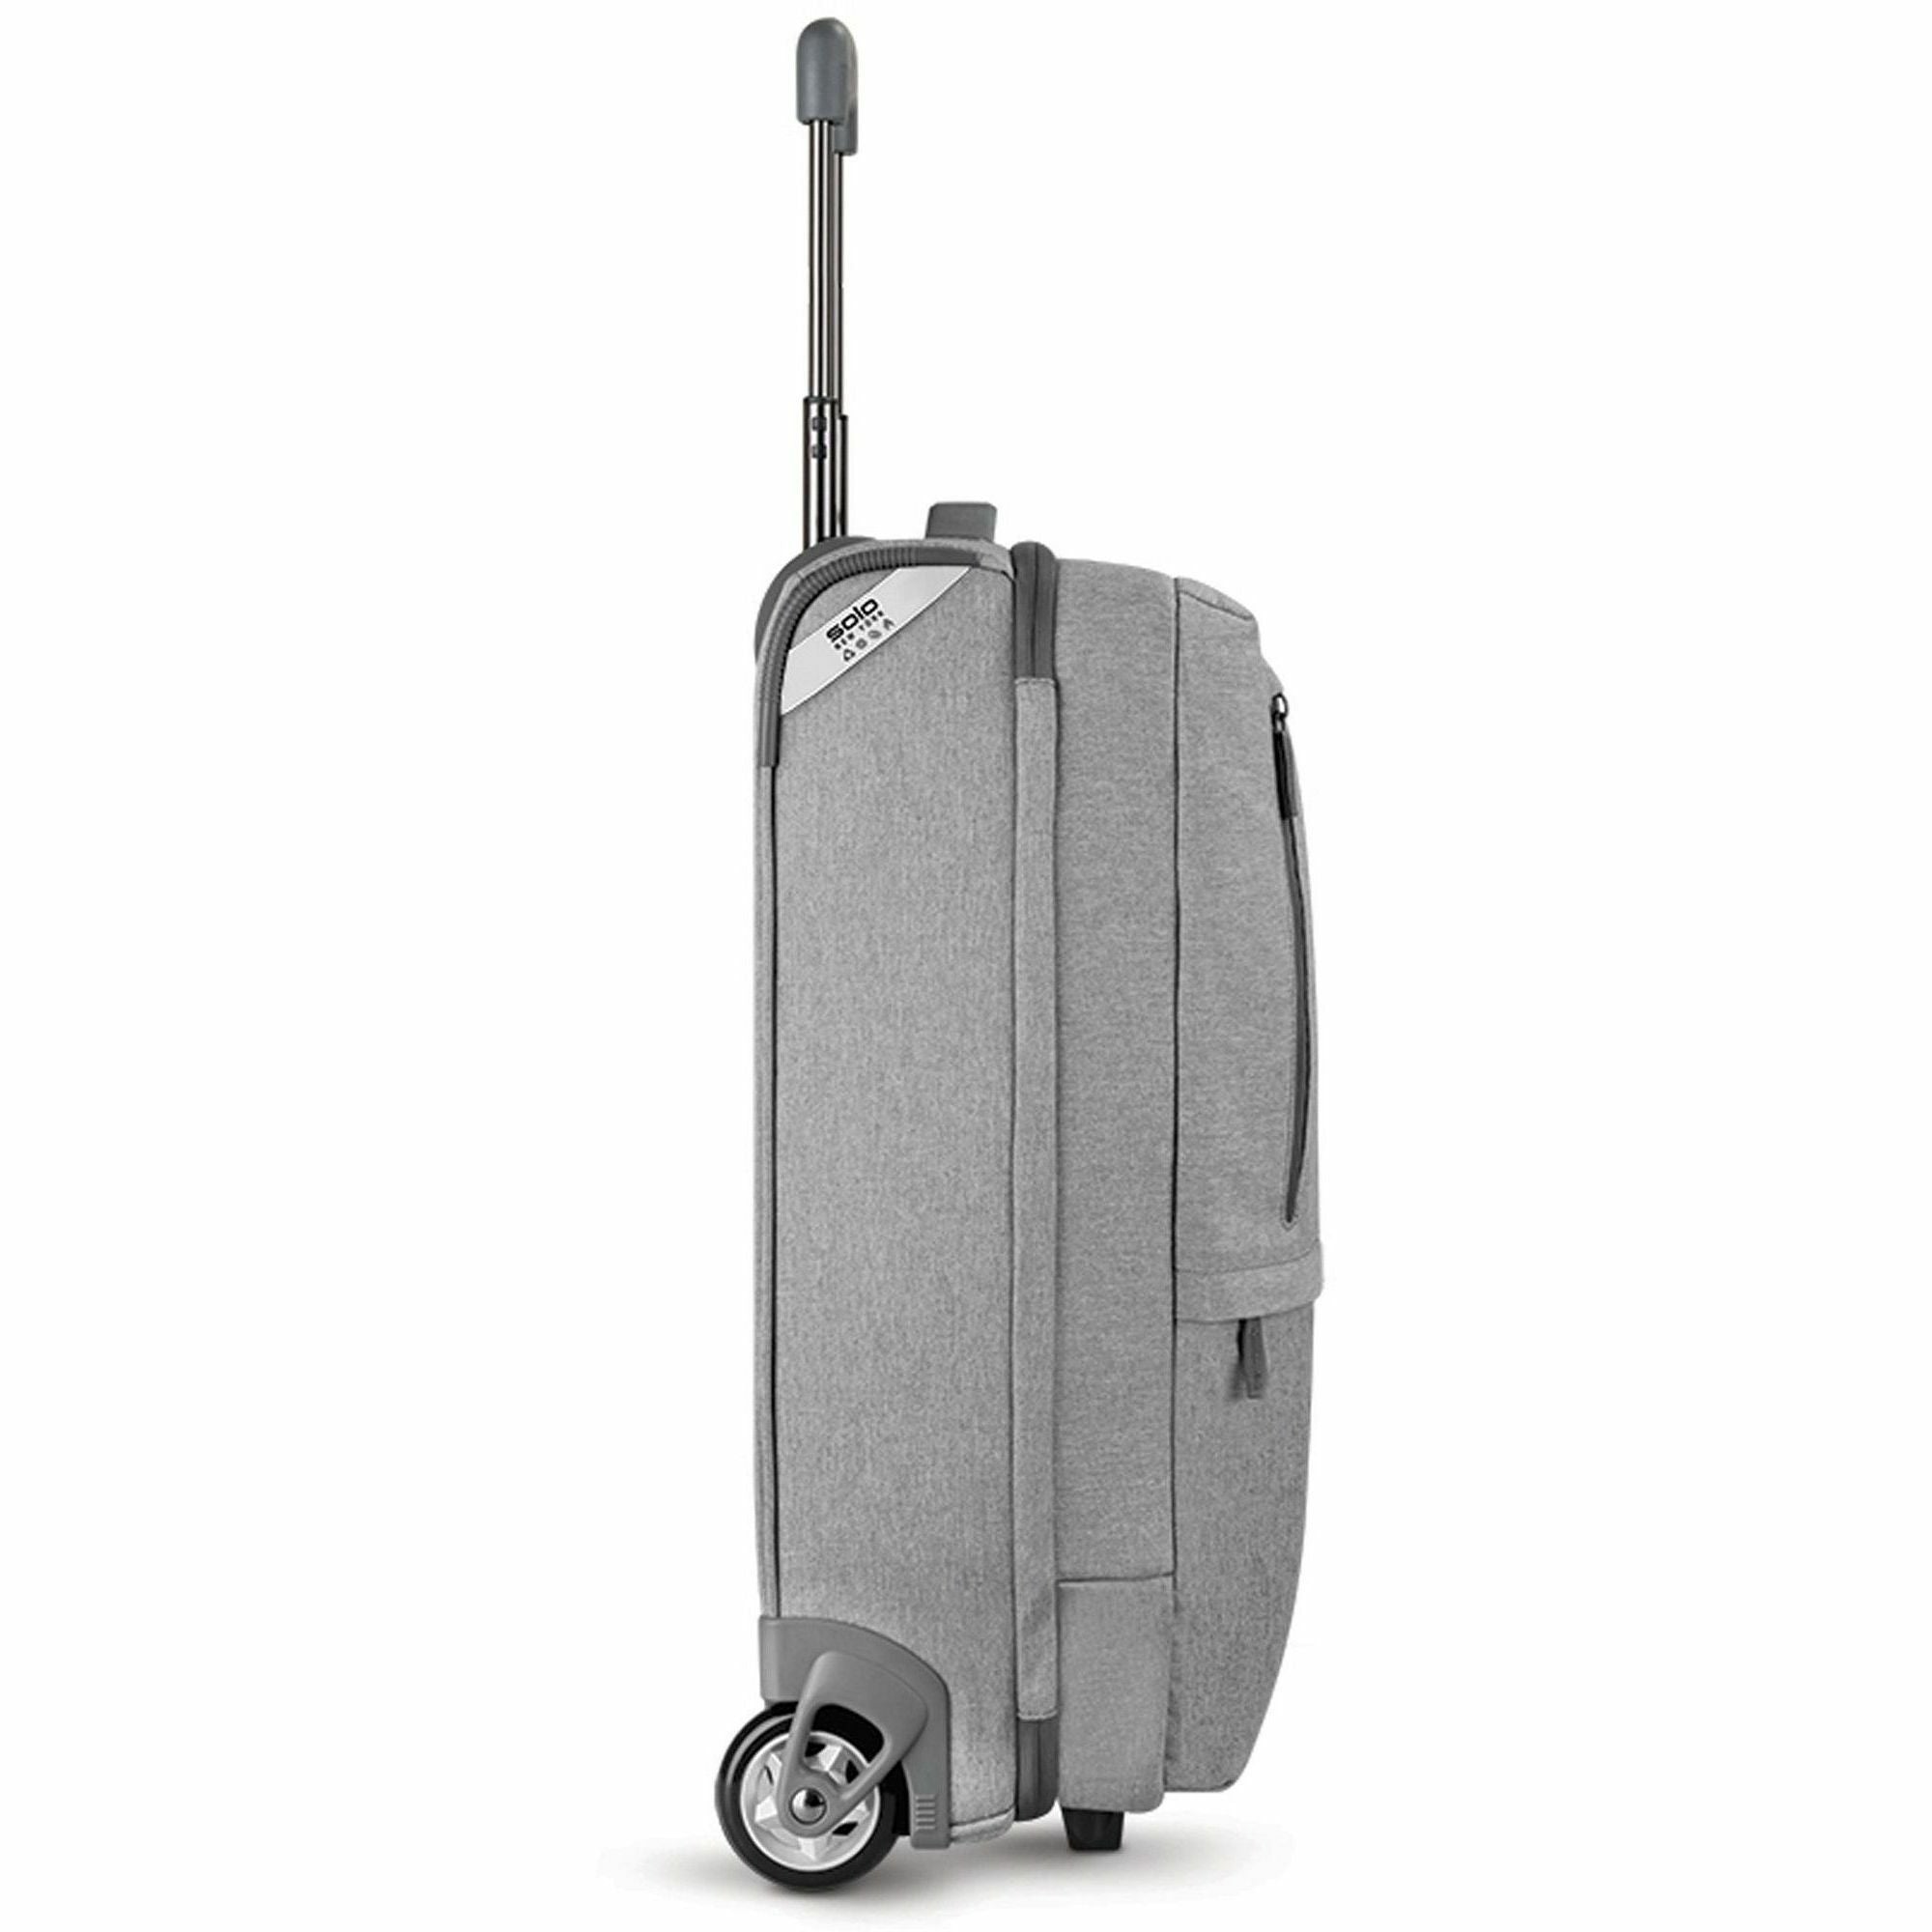 solo-retreat-travel-luggage-case-carry-on-luggage-travel-essential-gray-handle-22-height-x-14-width-x-7-depth-1-each_uslubn91410 - 5